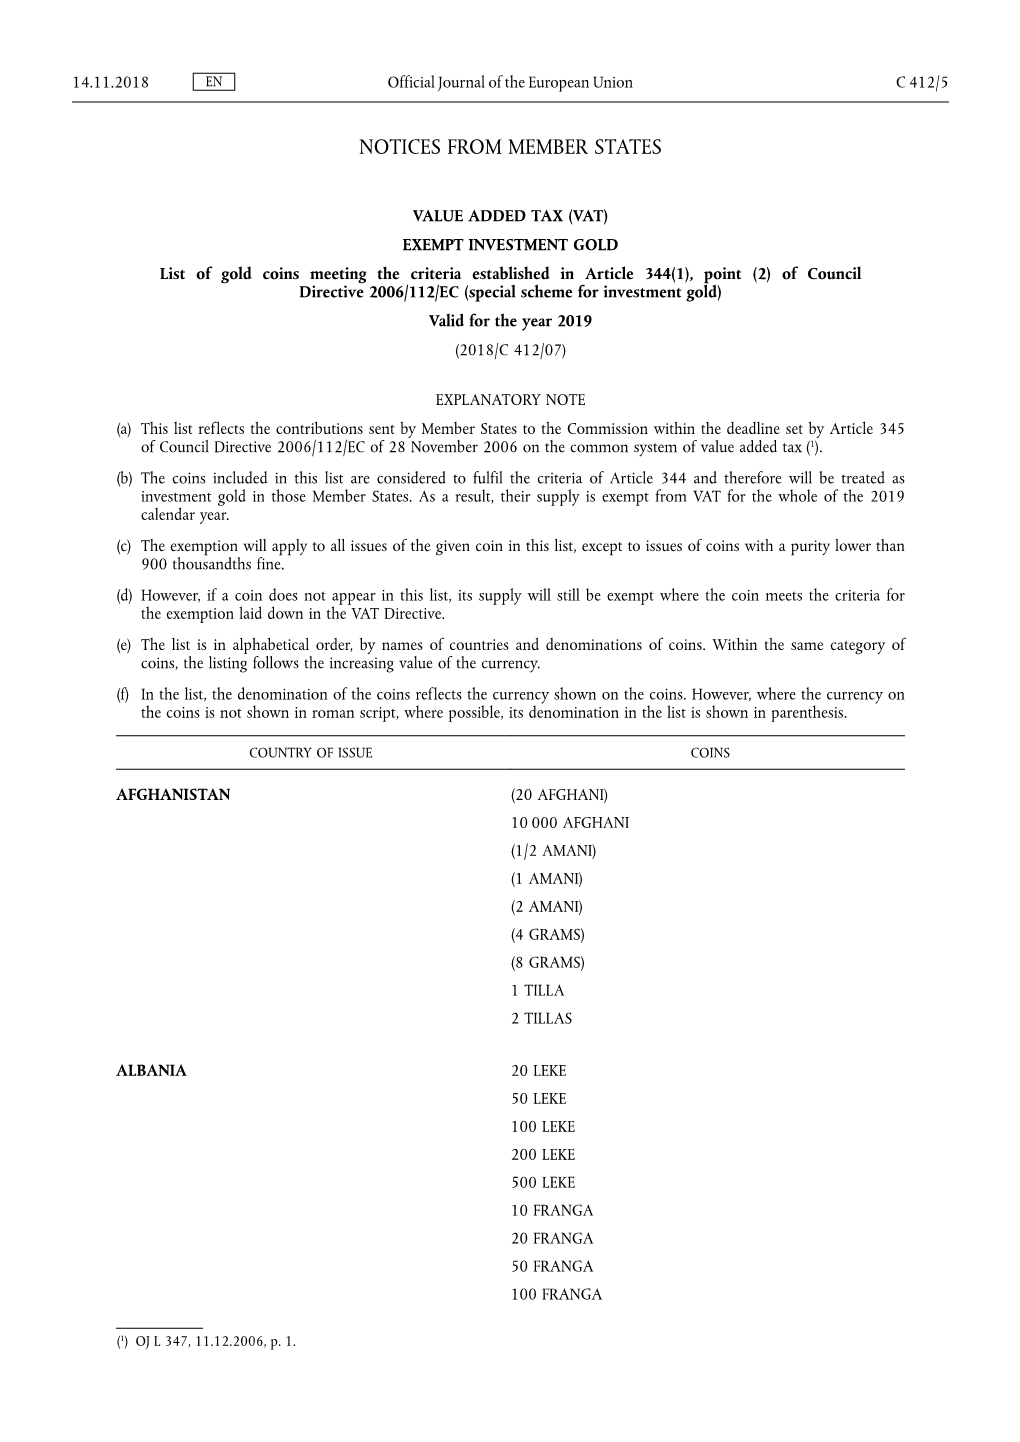 List of Gold Coins Meeting the Criteria Established in Article 344(1)